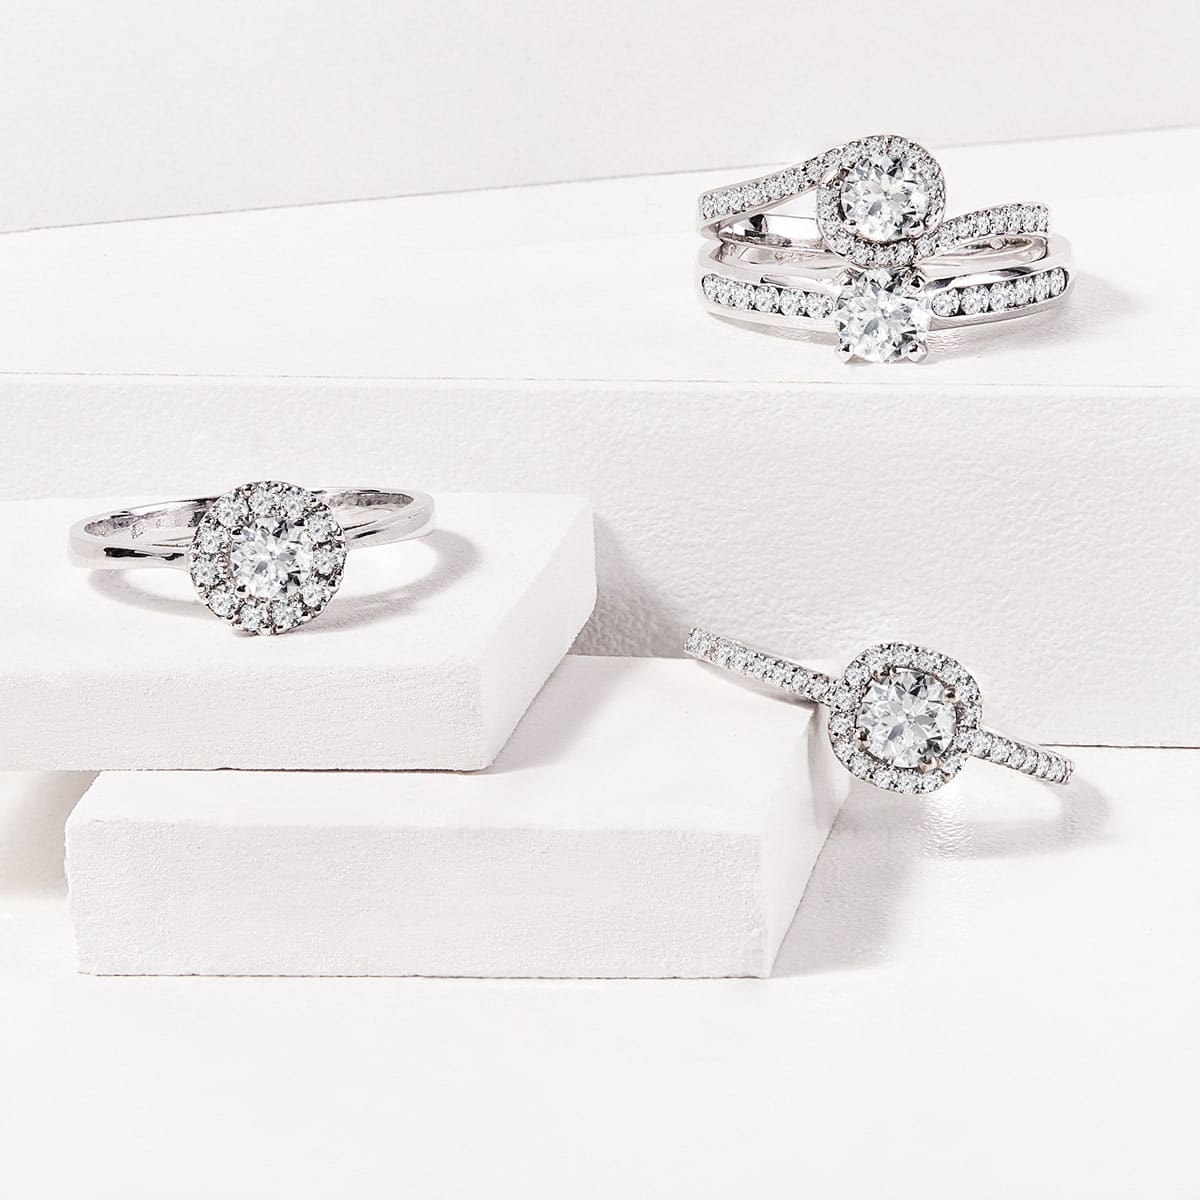 Five Engagement Ring Styles That Won’t Let You Down